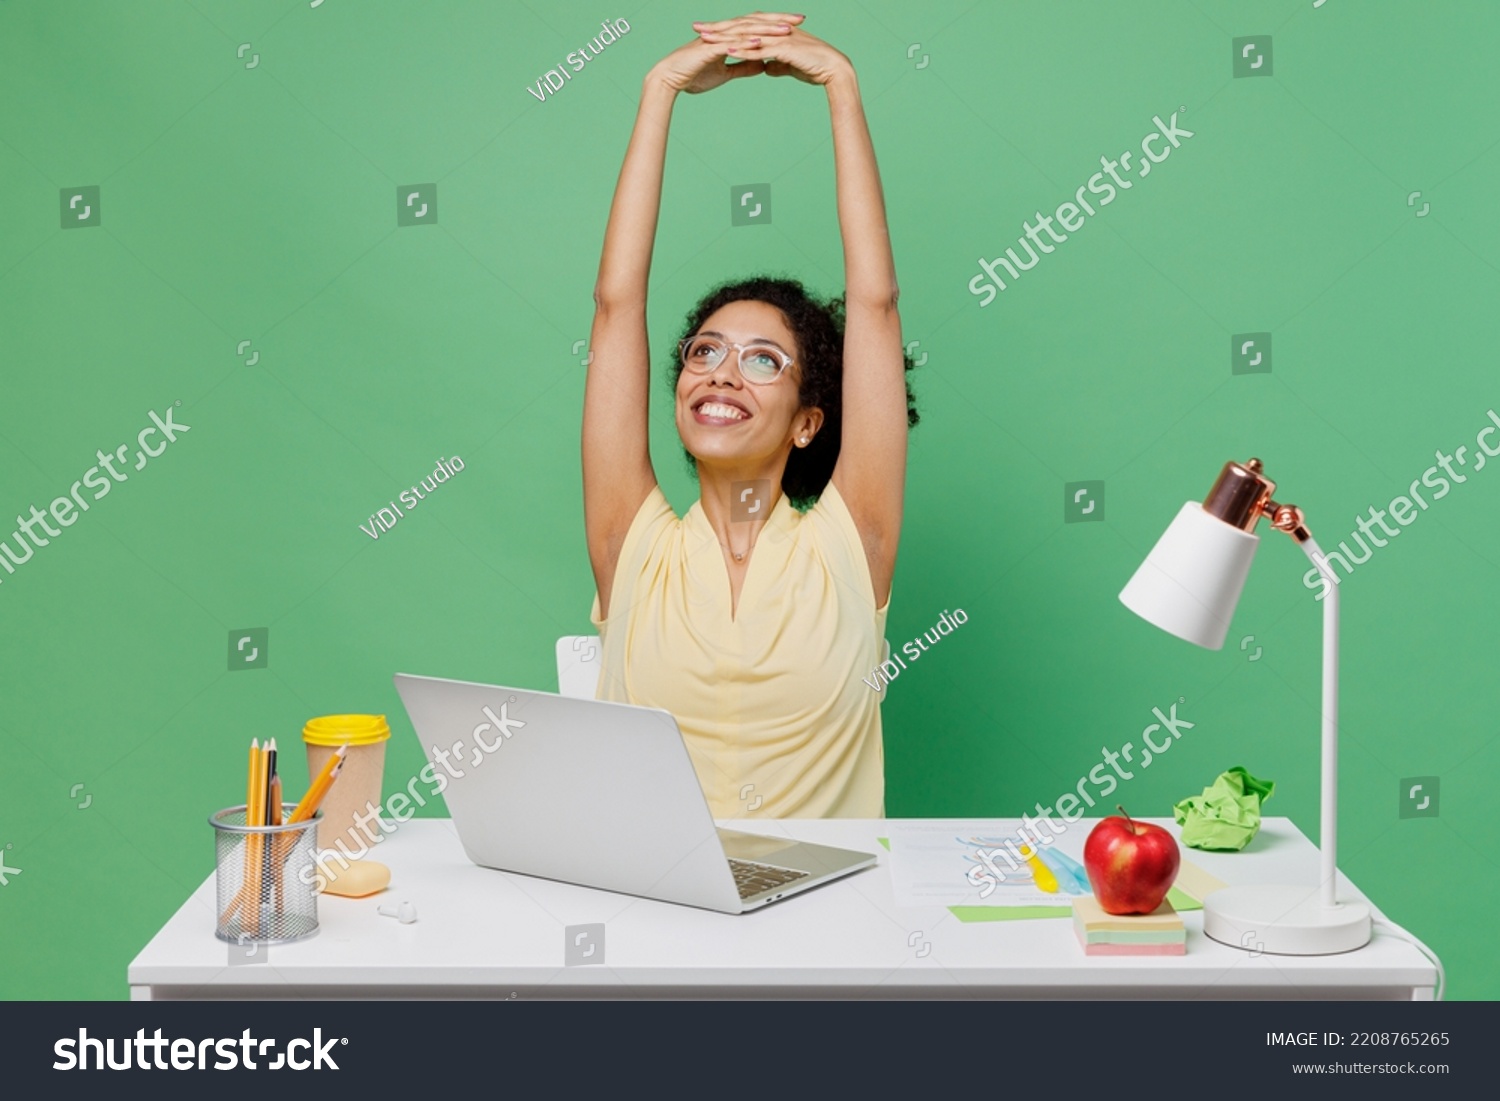 Young employee business woman of African American ethnicity wear shirt sit work at white office desk with pc laptop stretch hands rest isolated on plain green background. Achievement career concept. #2208765265